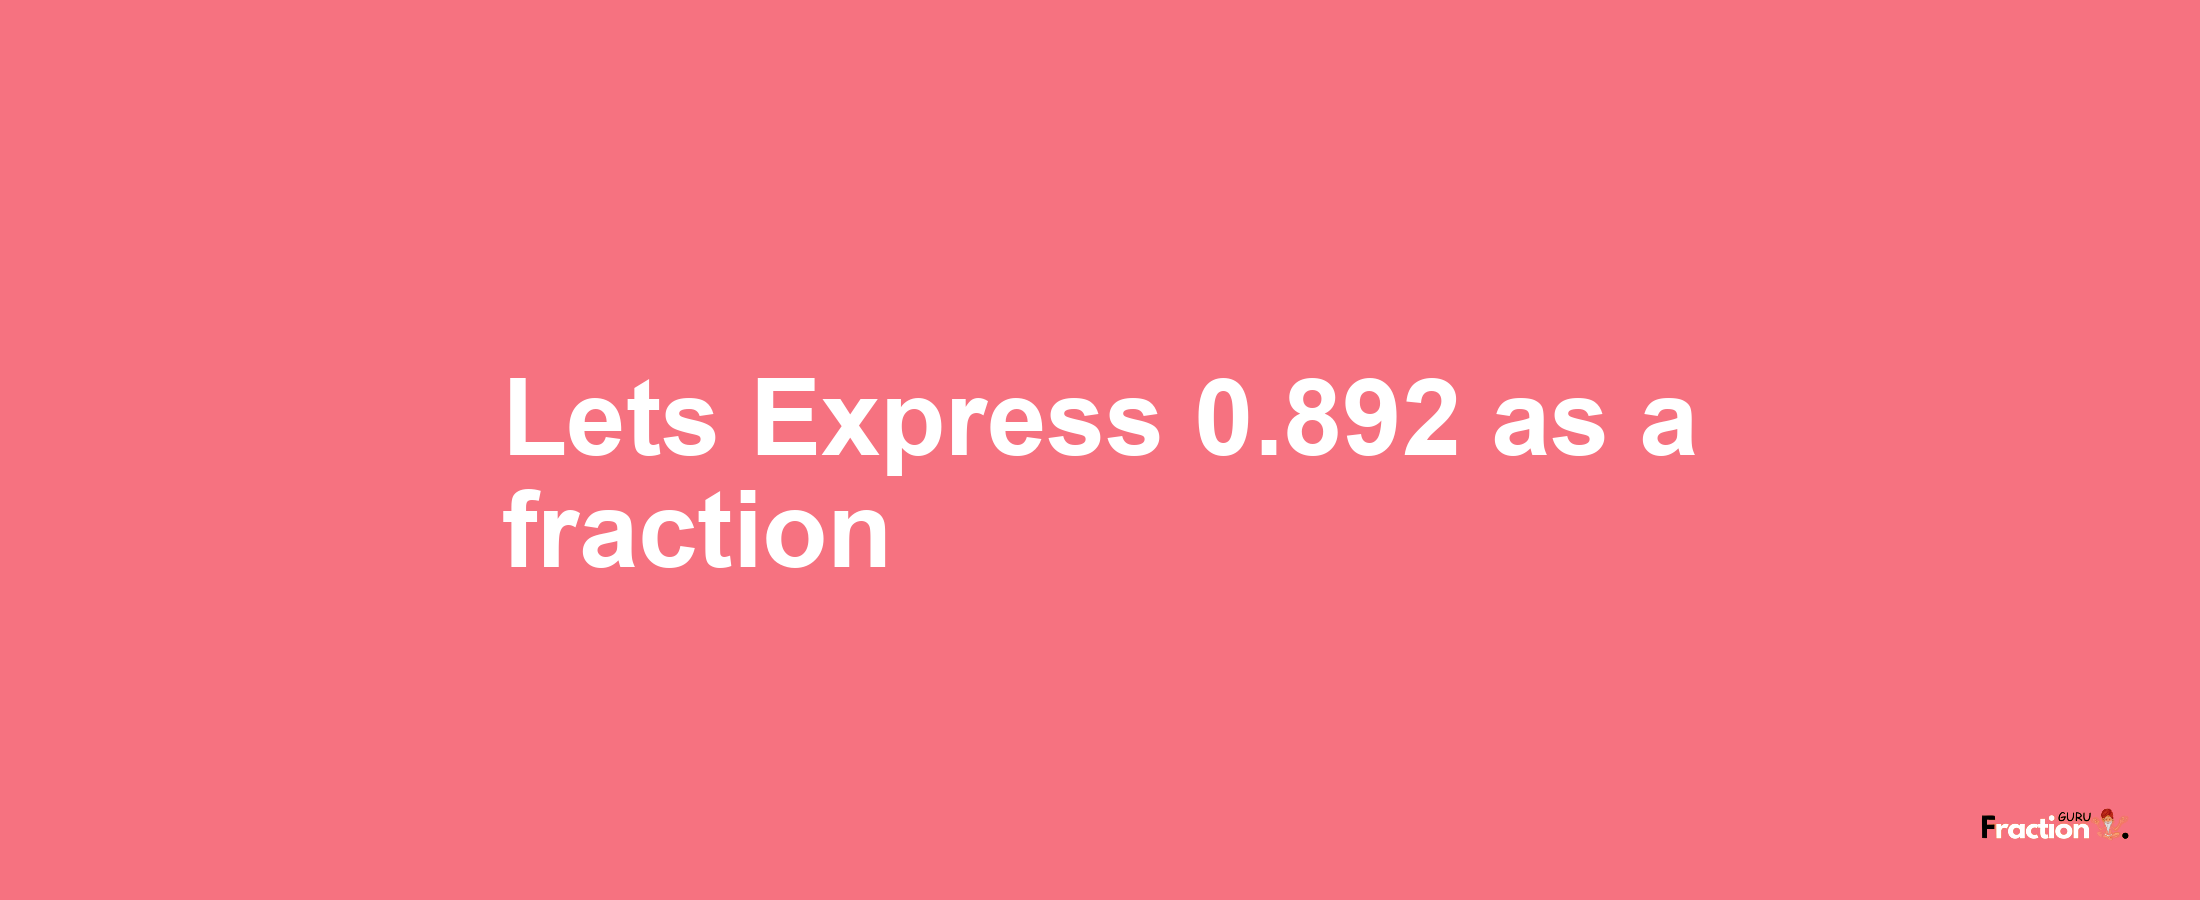 Lets Express 0.892 as afraction